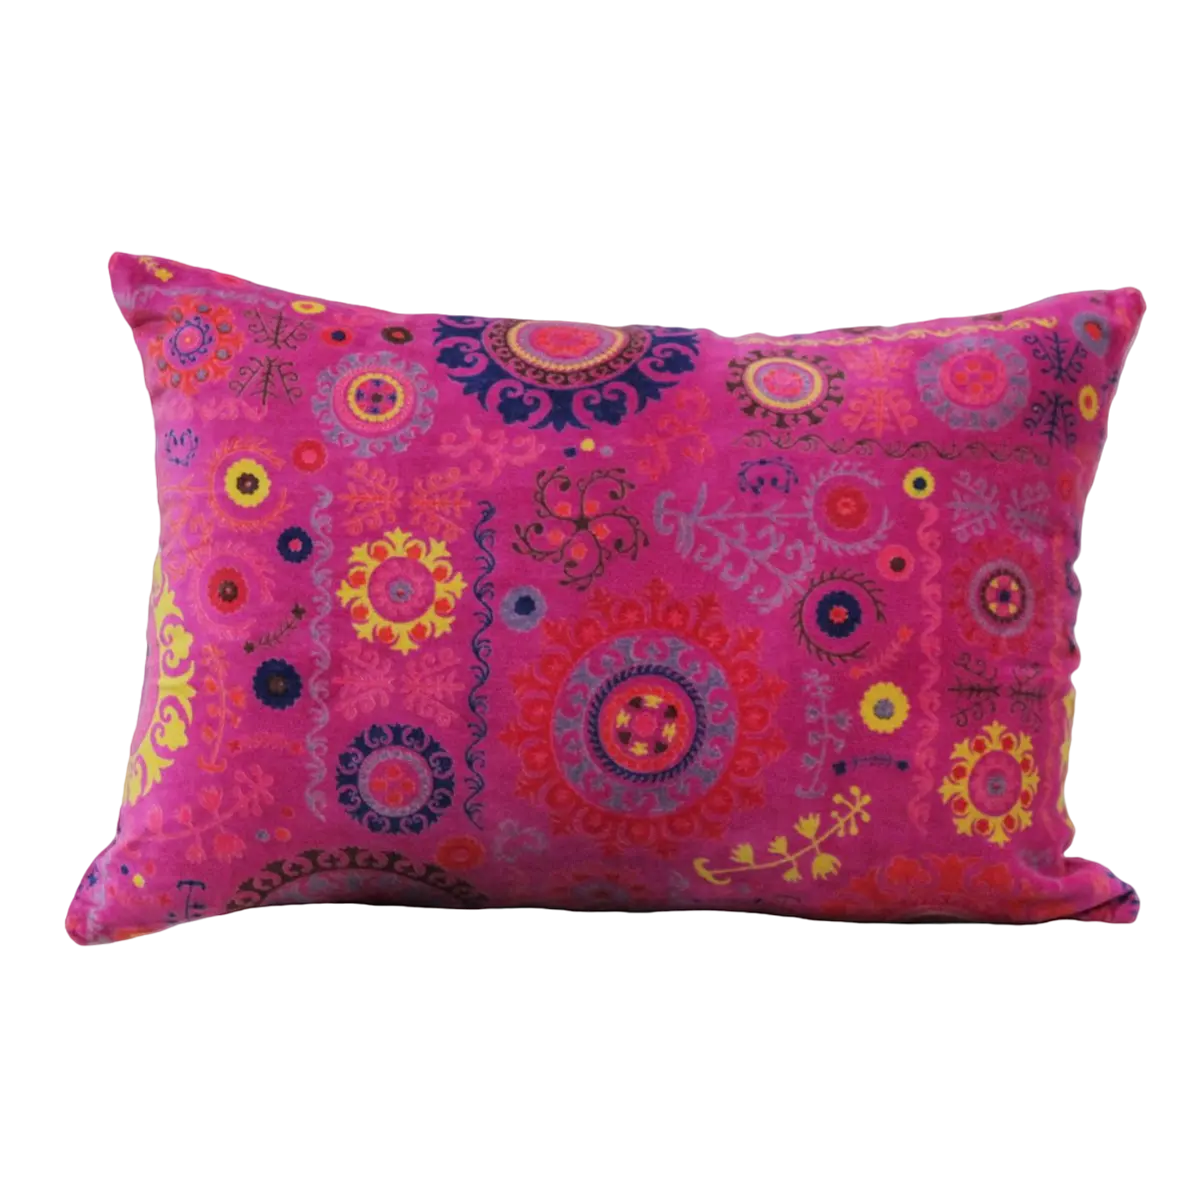 Wholesale Custom Made Screen Printed Decorative High Selling Suzani Cushion Covers Decorative Latest Design Pillow Covers